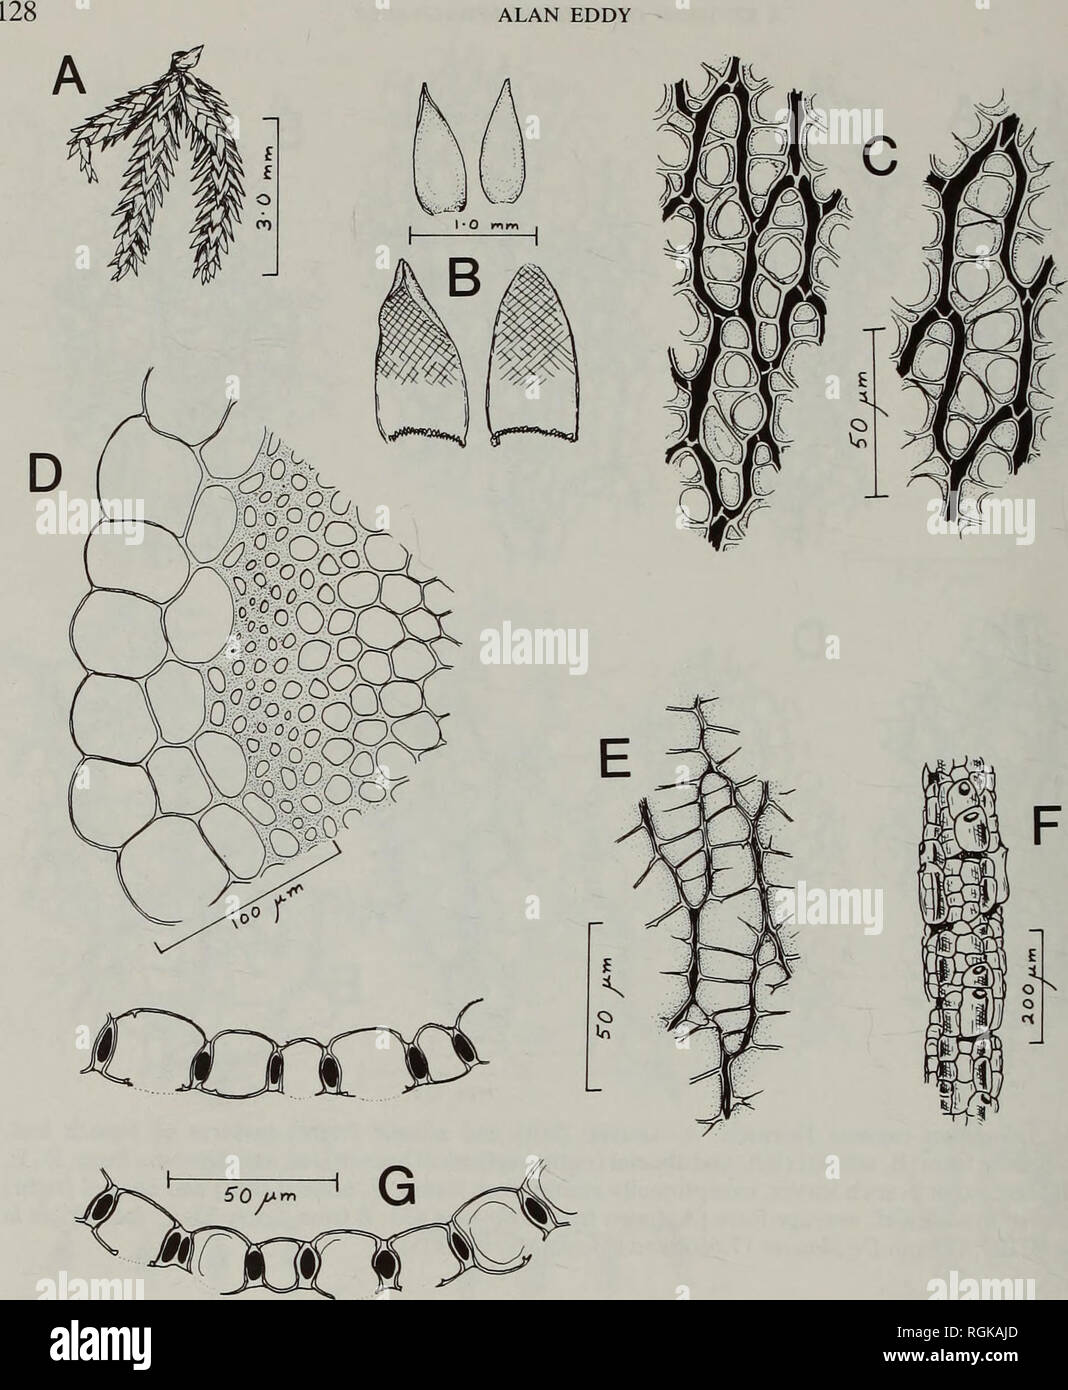 . Bulletin of the British Museum (Natural History) Botany. ALAN EDDY. Fig. 29 Sphagnum capense Hornsch. A, branch fascicle; B, branch leaves (above) and stem leaves (below); C, adaxial (left) and abaxial (right) surfaces of branch leaves; D, transverse section of stem; E, abaxial surface of non-resorbed branch leaf cells; F, branch cortex; G, transverse sections of branch leaves (all drawn from the type of 5. islei). wide-ovate, very concave; apices truncate-dentate, less commonly narrow and more or less mucronate, occasionally eroded; border narrow, typically of a single series of cells, with Stock Photo